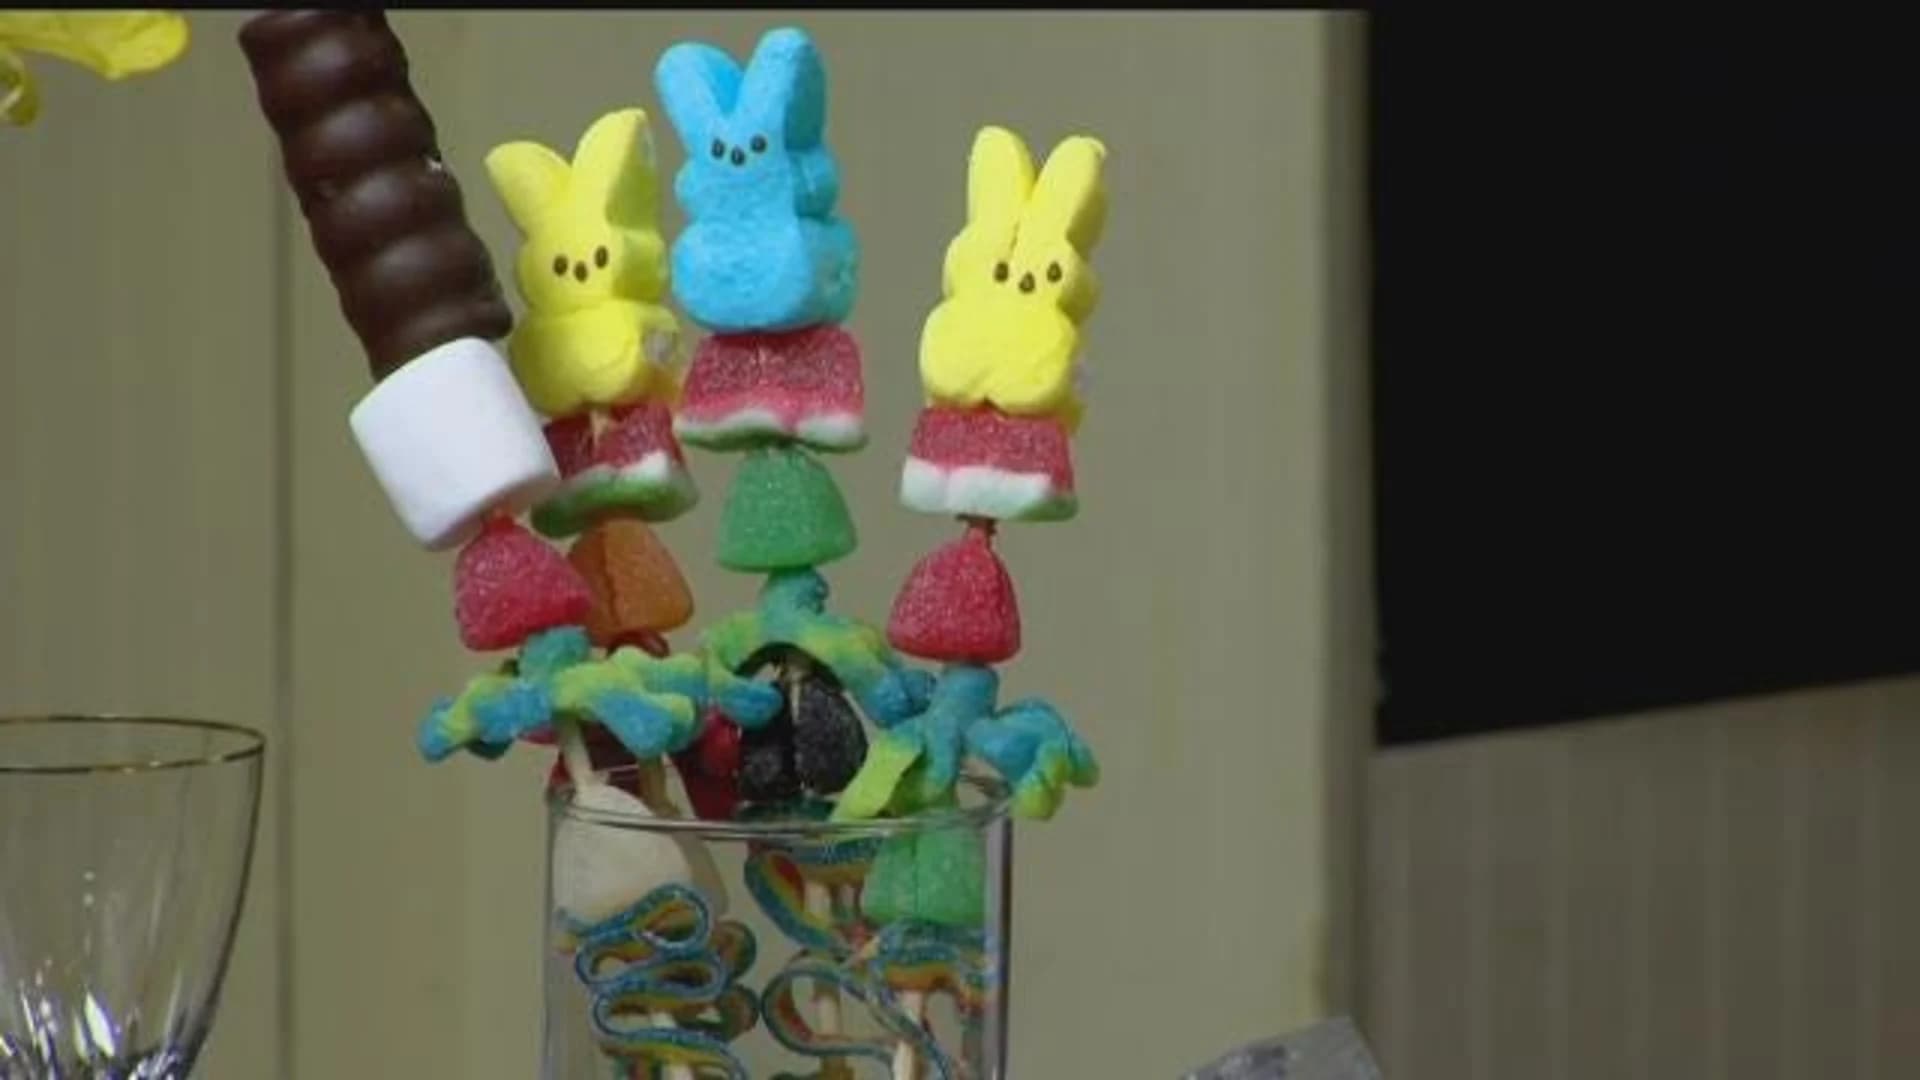 Chef's Quick Tips: Spring holiday candy kebobs